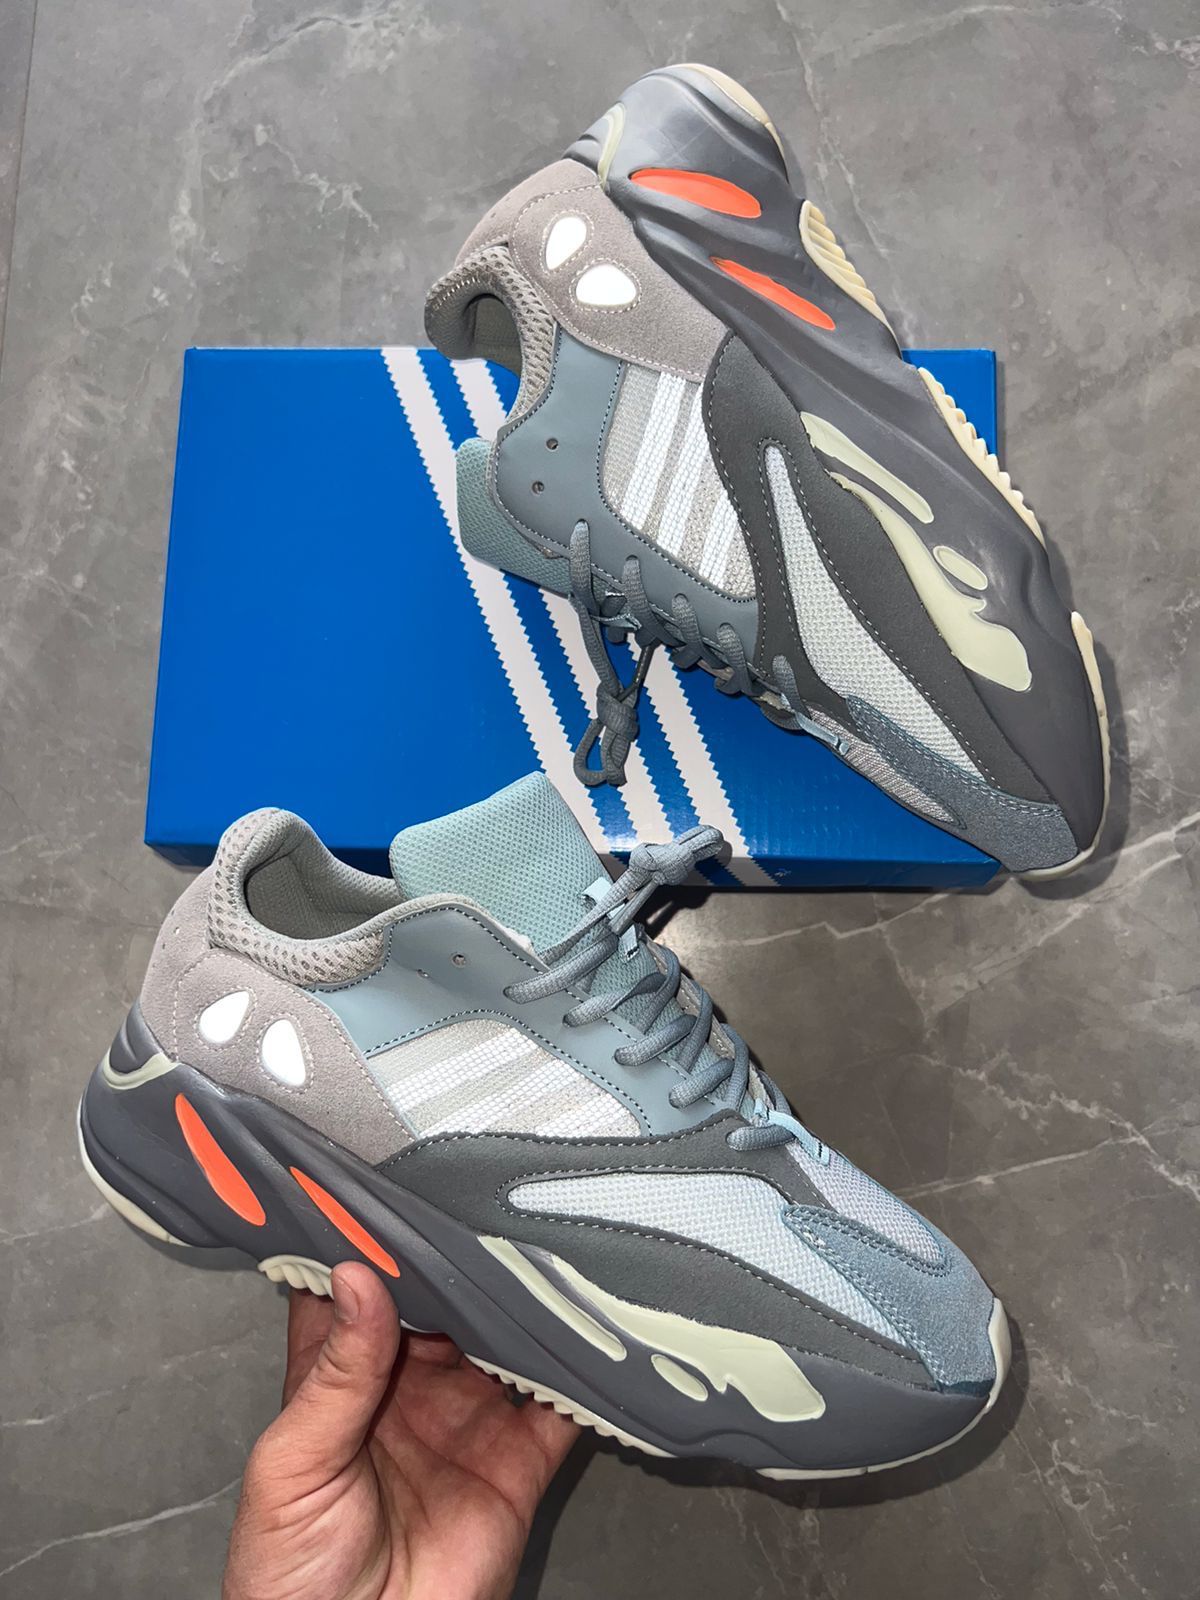 Yeezy 700 Wave Runner Grey Sports Shoes